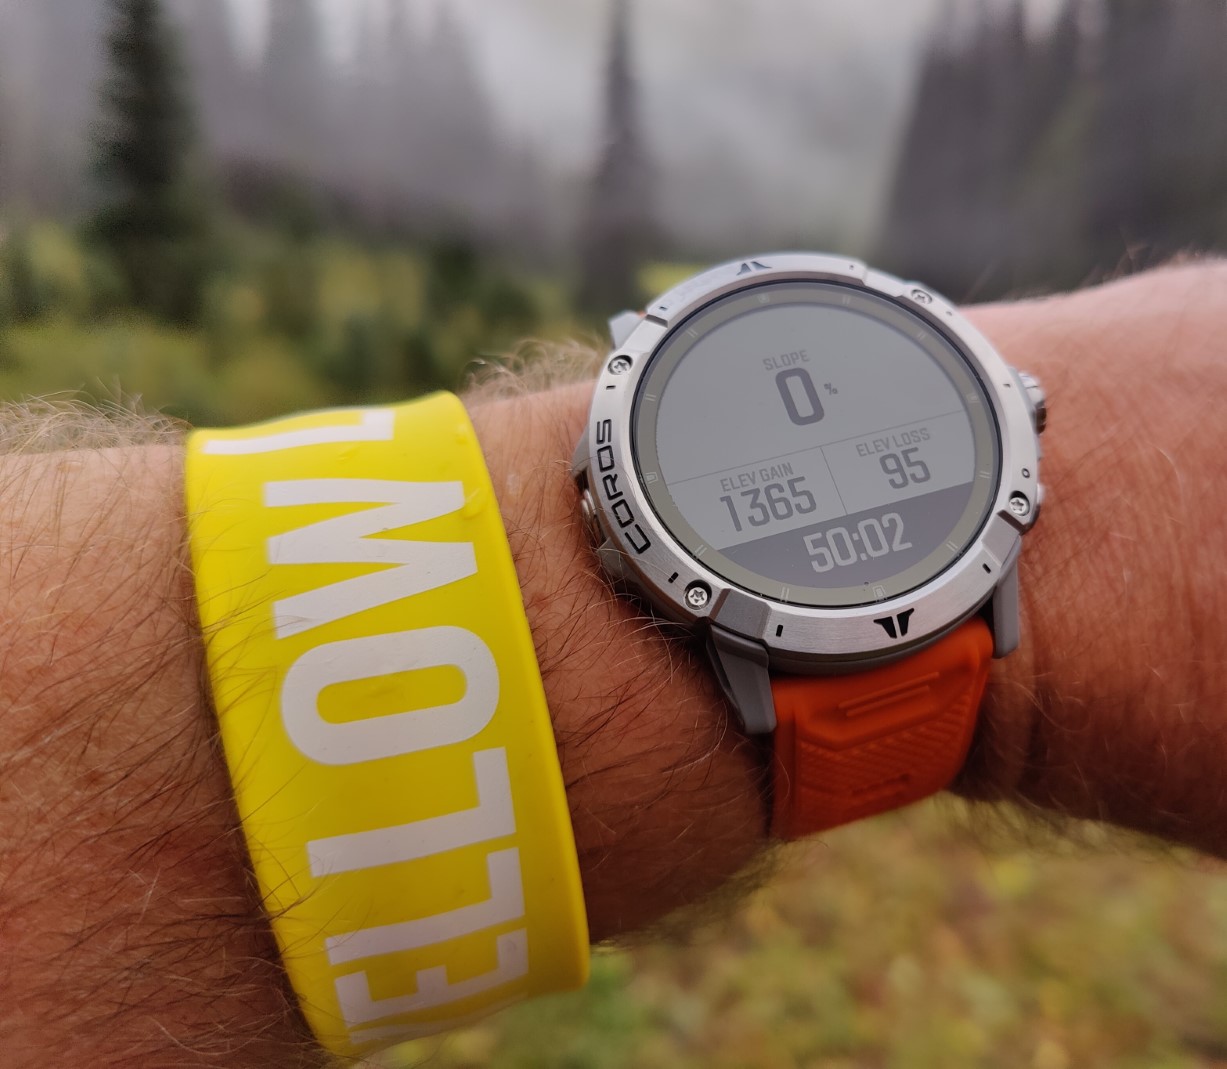 COROS Vertix 2 outdoor sports watch review: Challenging Garmin with longer  battery life, lower price, dual GNSS support